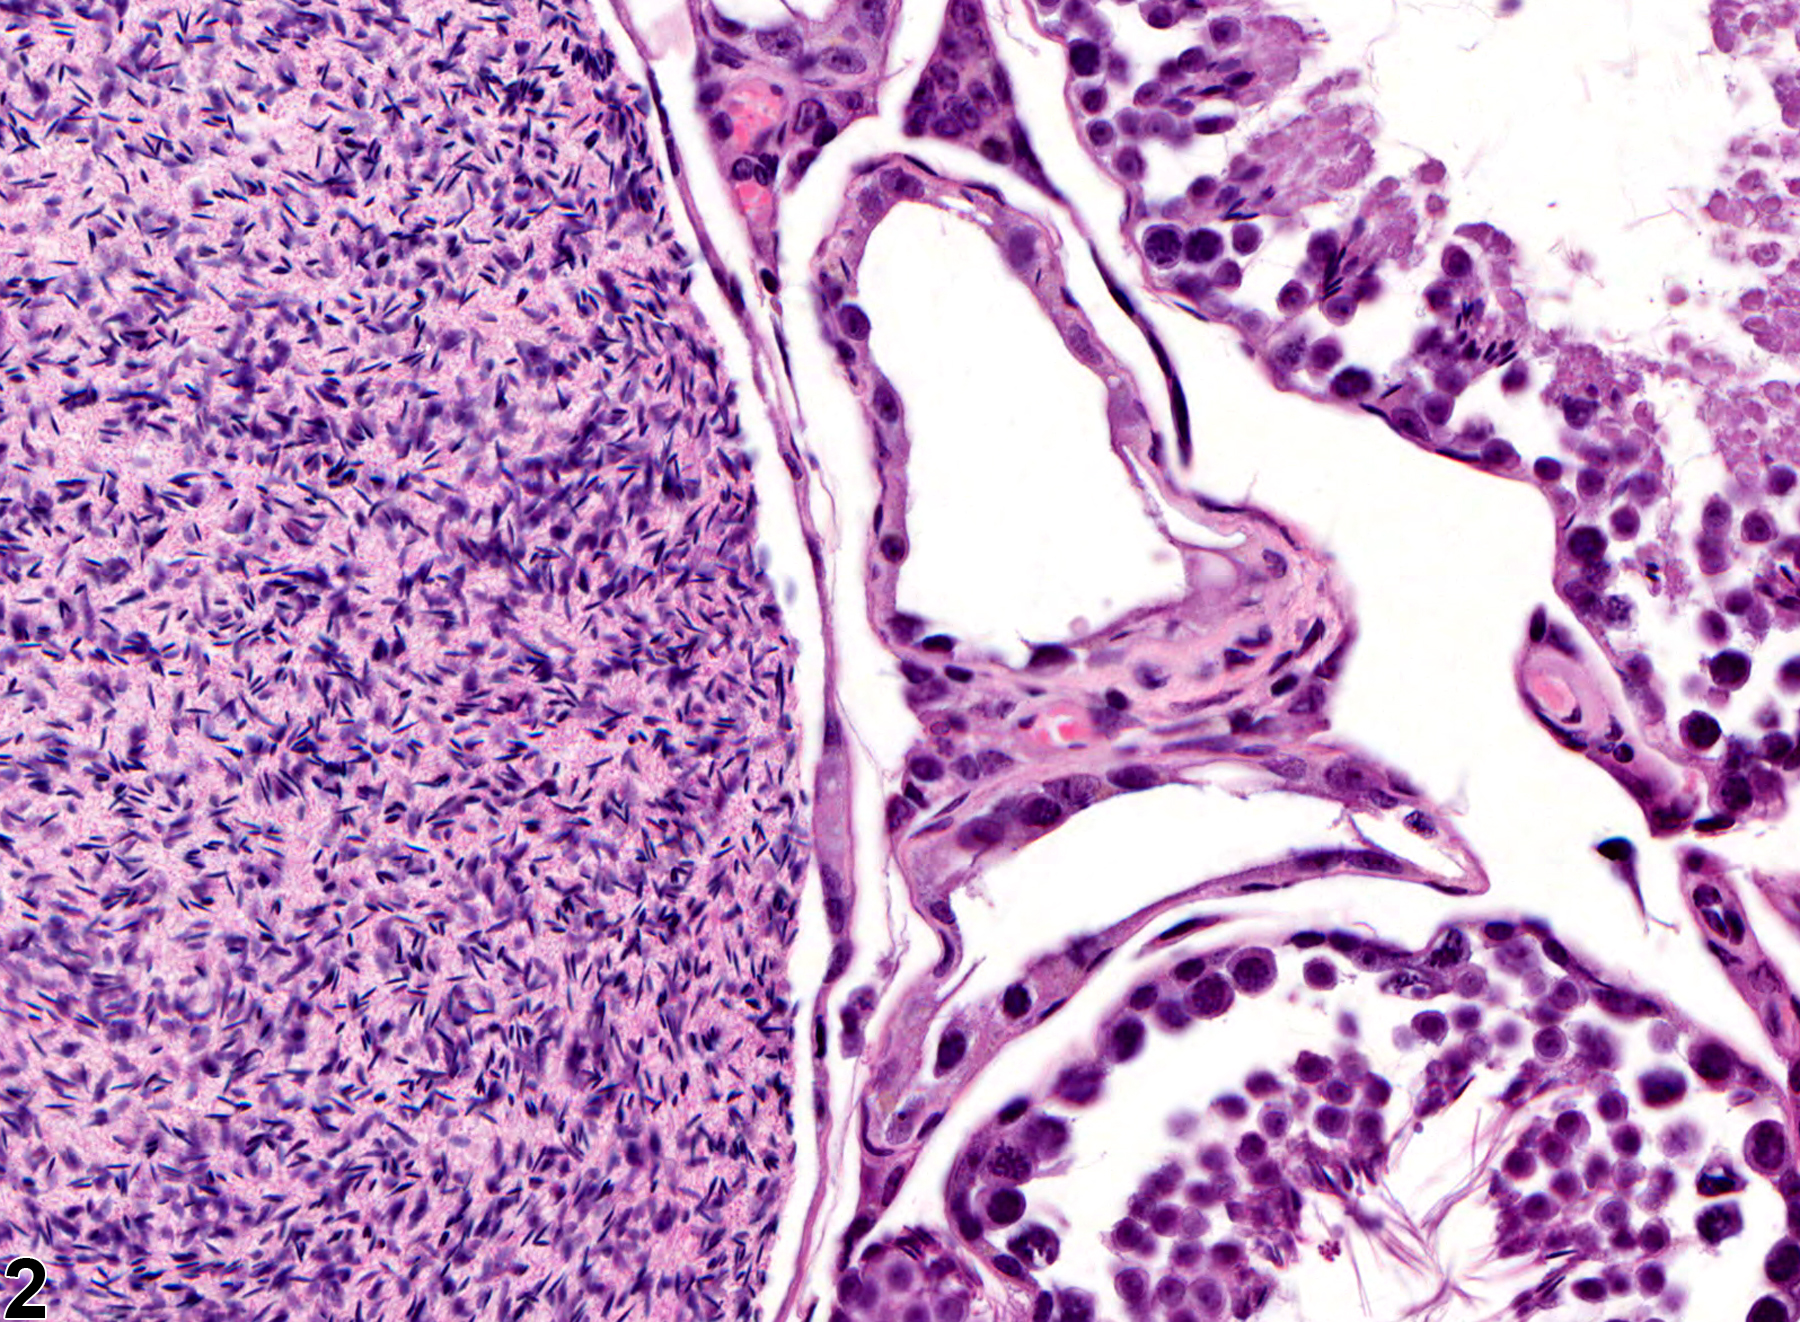 Image of spermatocele in the testis from a male B6C3F1 mouse in a chronic study